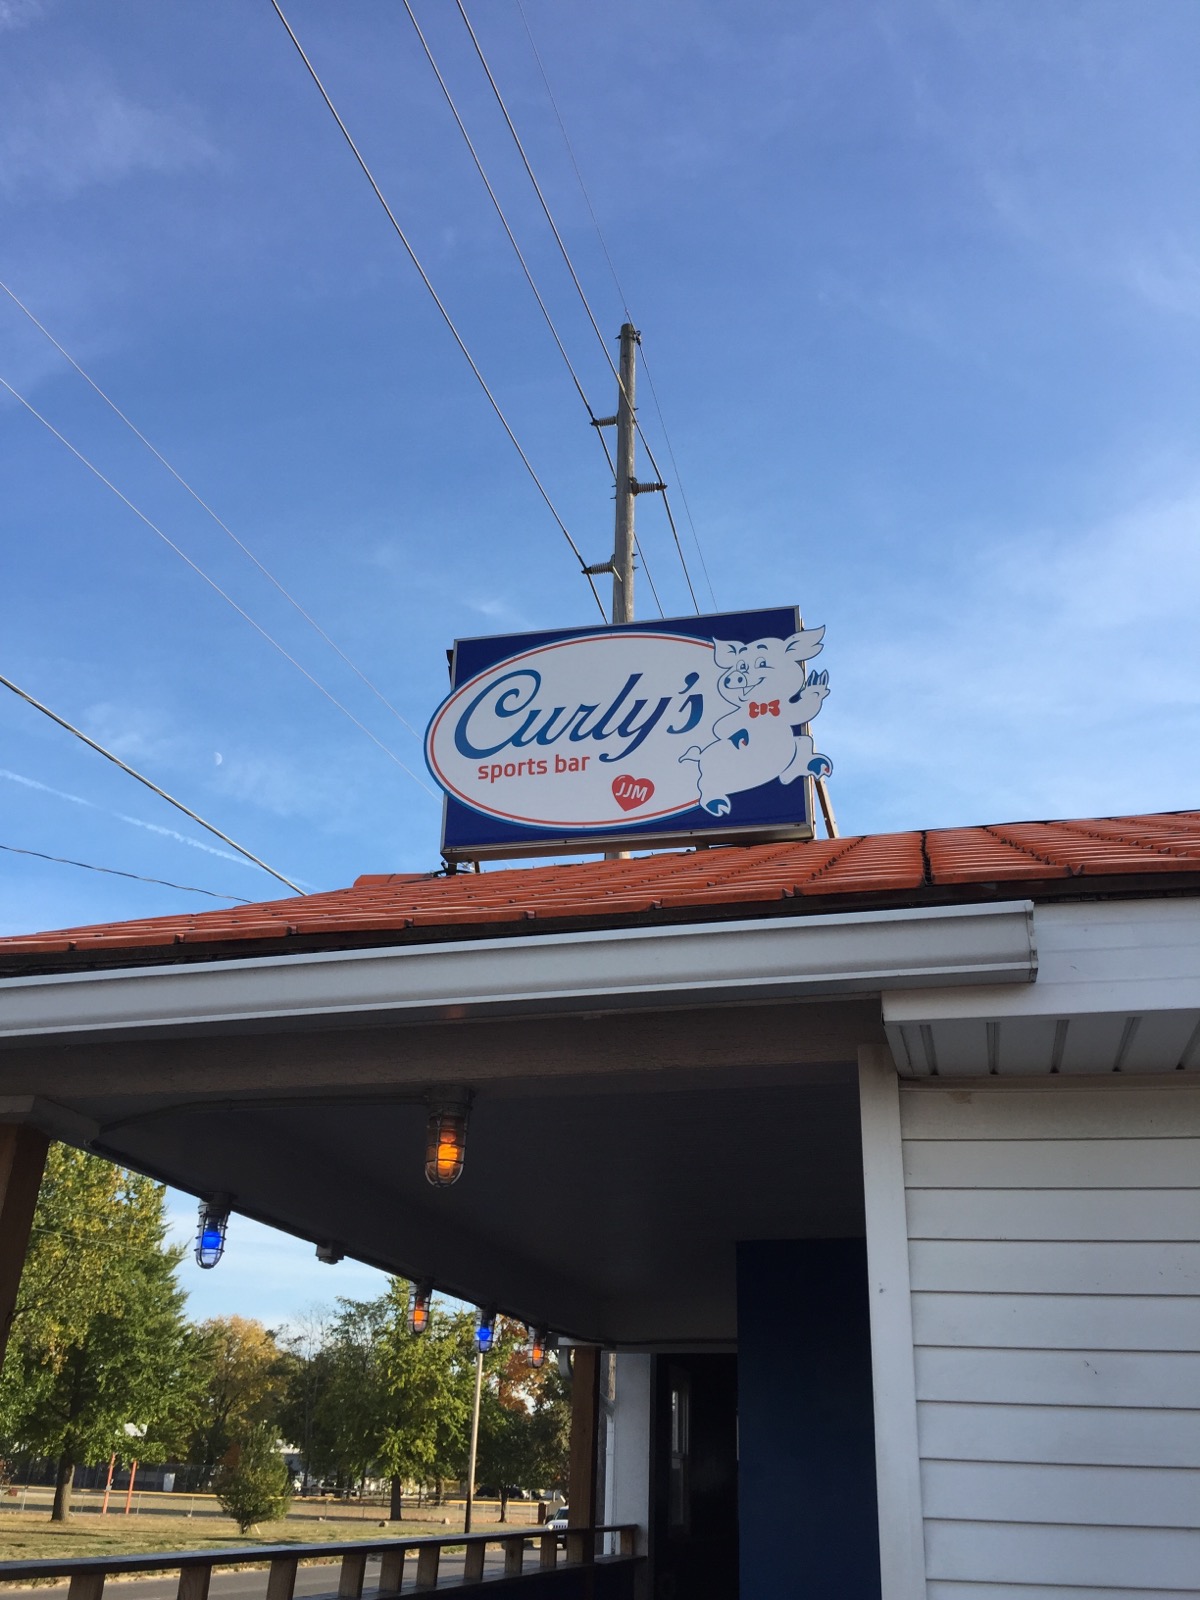 Curly's Sports Bar